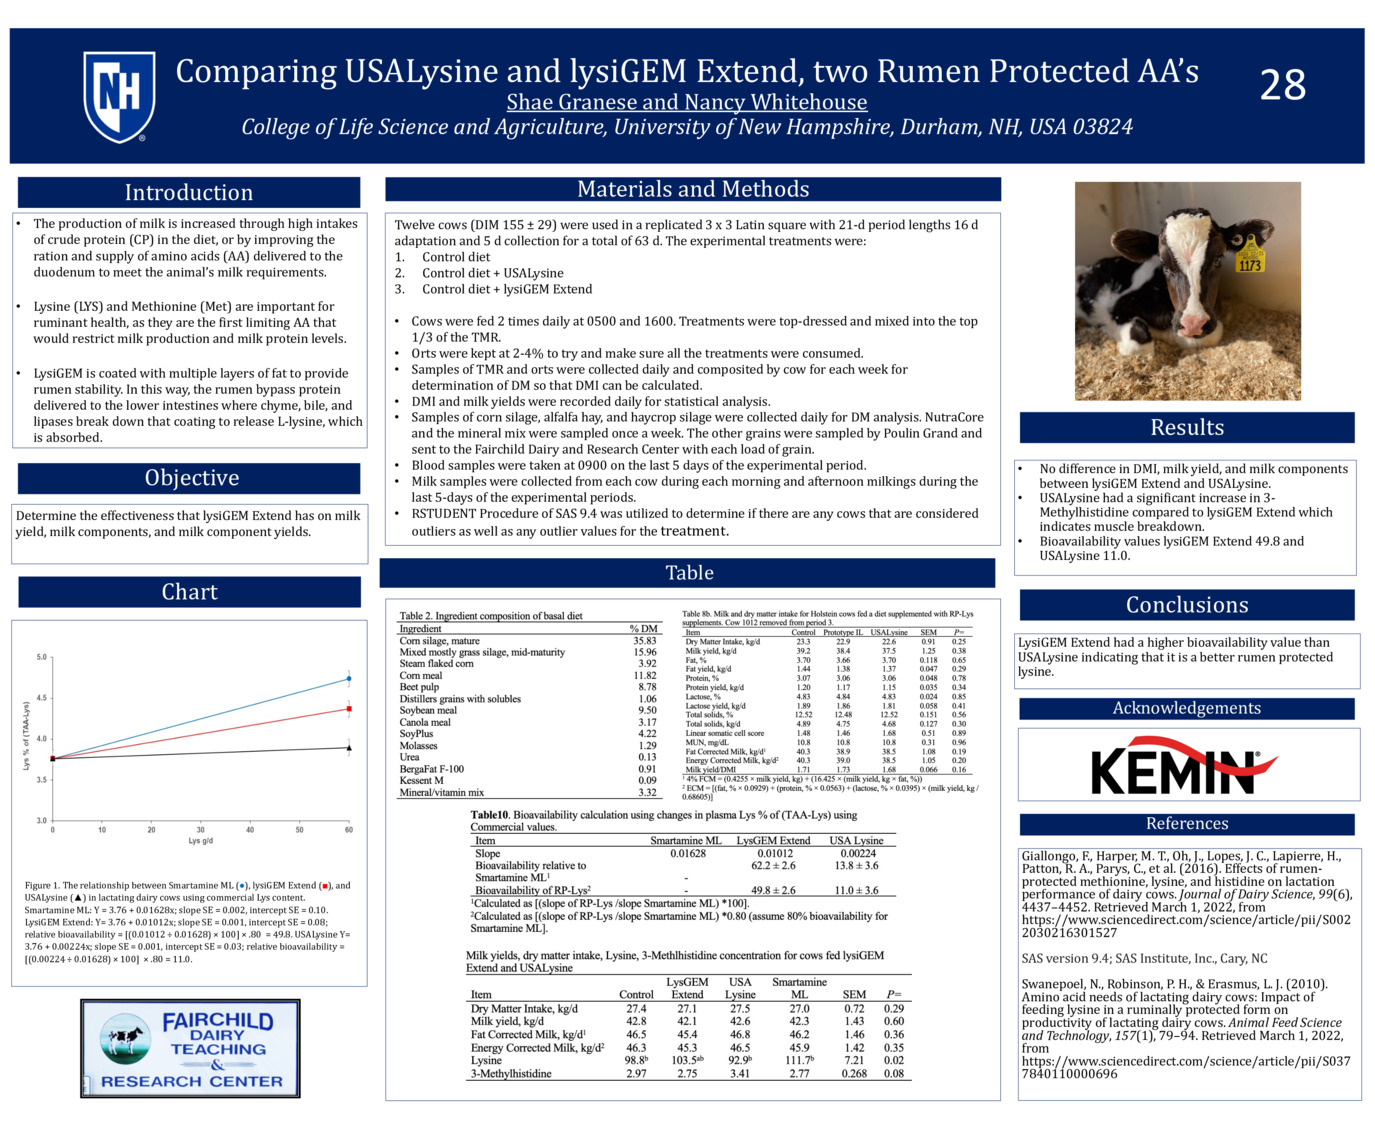 Comparing Usalysine And Lysigem Extend, Two Rumen Protected Aa's by sqg1002